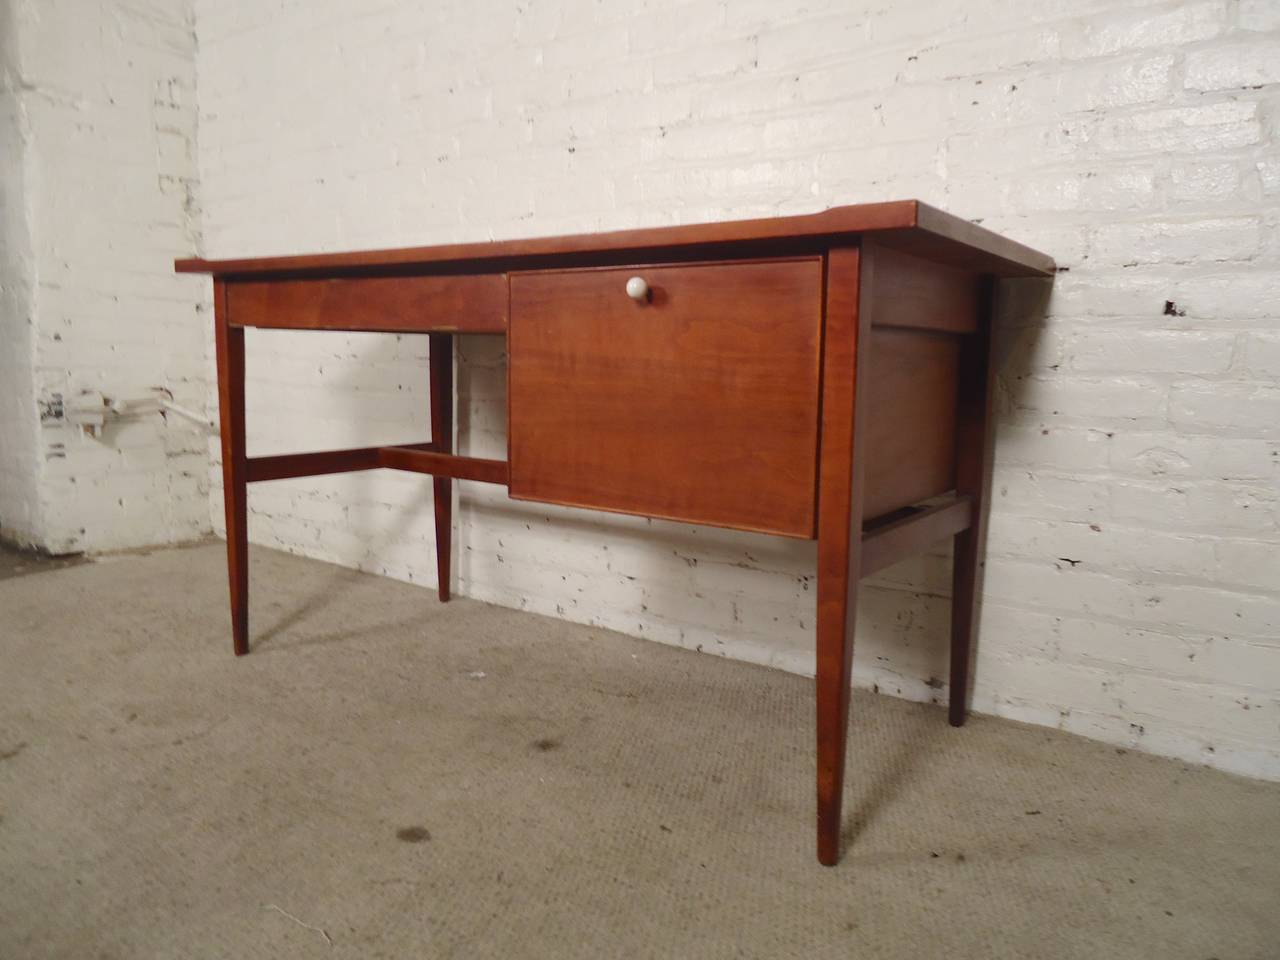 Designed by Kipp Stewart for Drexel with simple and sophisticate modern lines. Large file drawer and wide desk drawer, tapered legs, warm walnut grain. Stewart's design adds a nice sculpted lip around the edge.

(Please confirm item location - NY